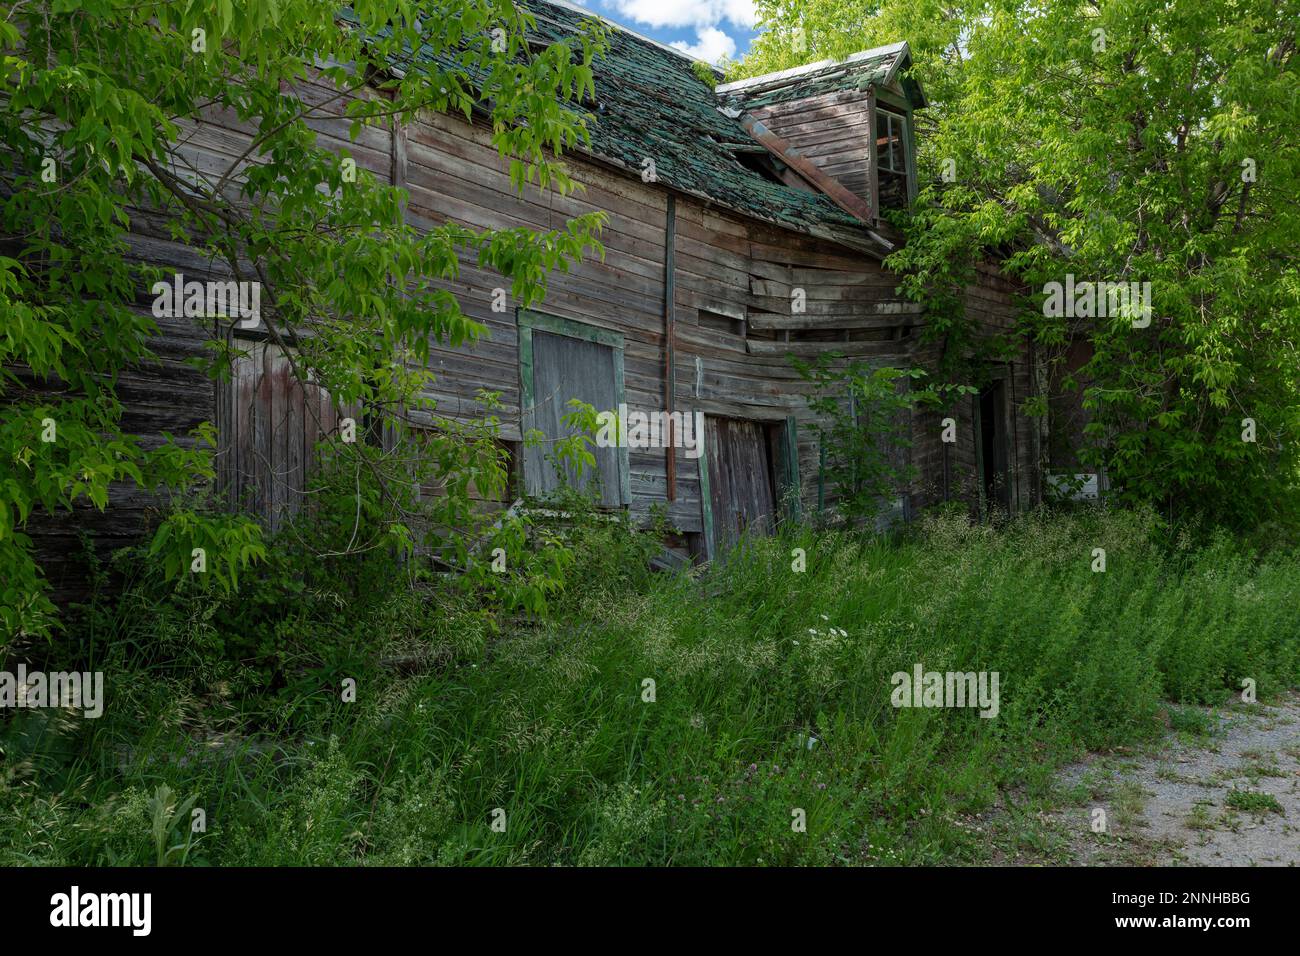 A dilapidated structure in the ghost town of Balaclava, which saw its heyday in the late 1800s as part of the bustling timber industry. Stock Photo